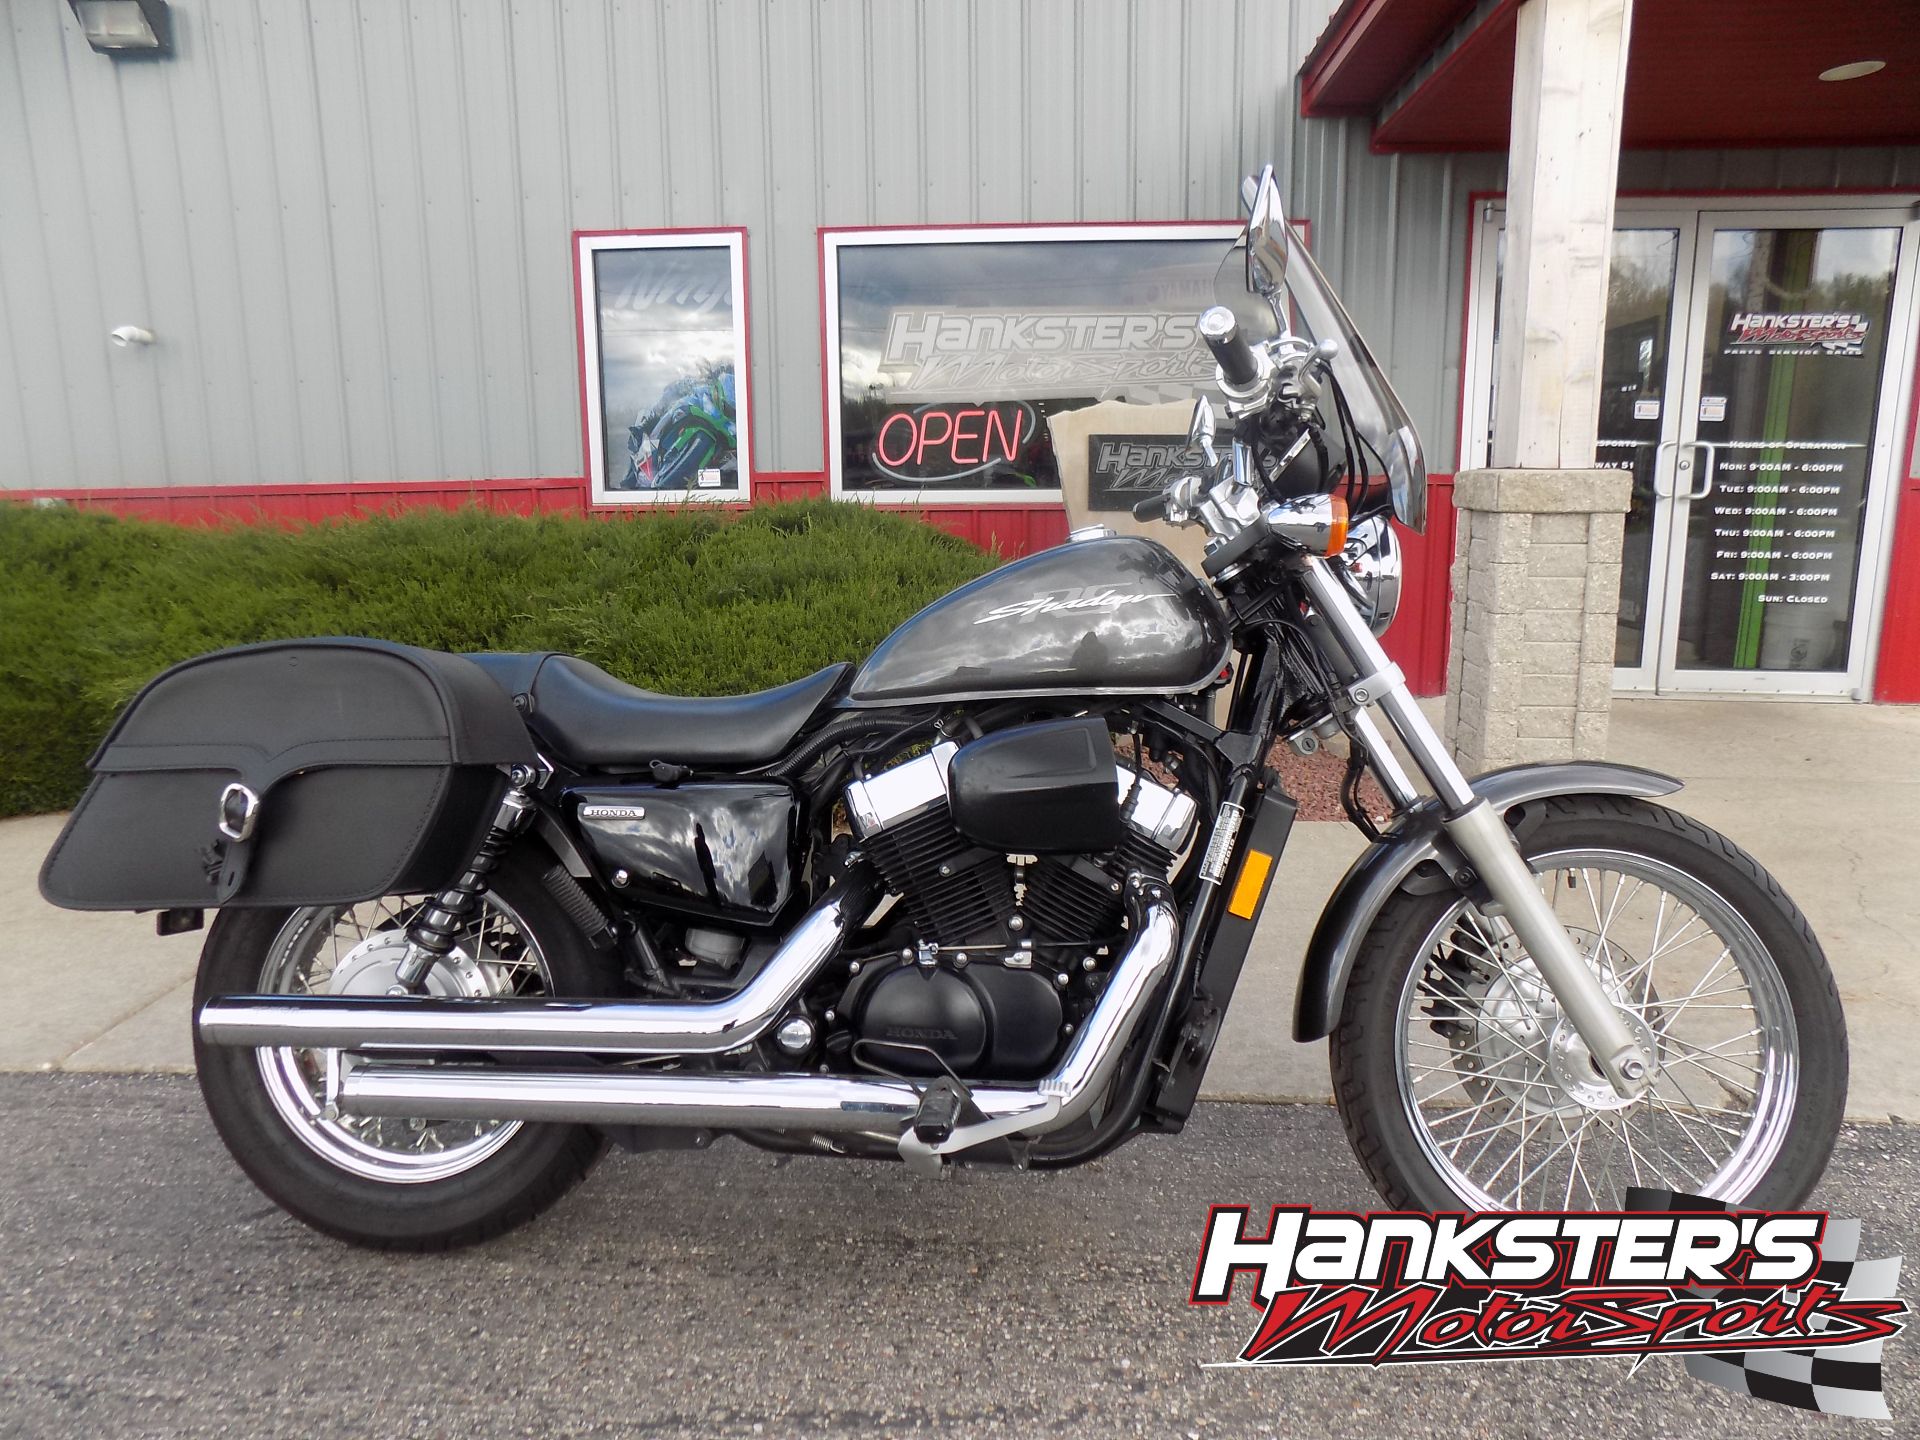 2010 Honda Shadow® RS in Janesville, Wisconsin - Photo 1